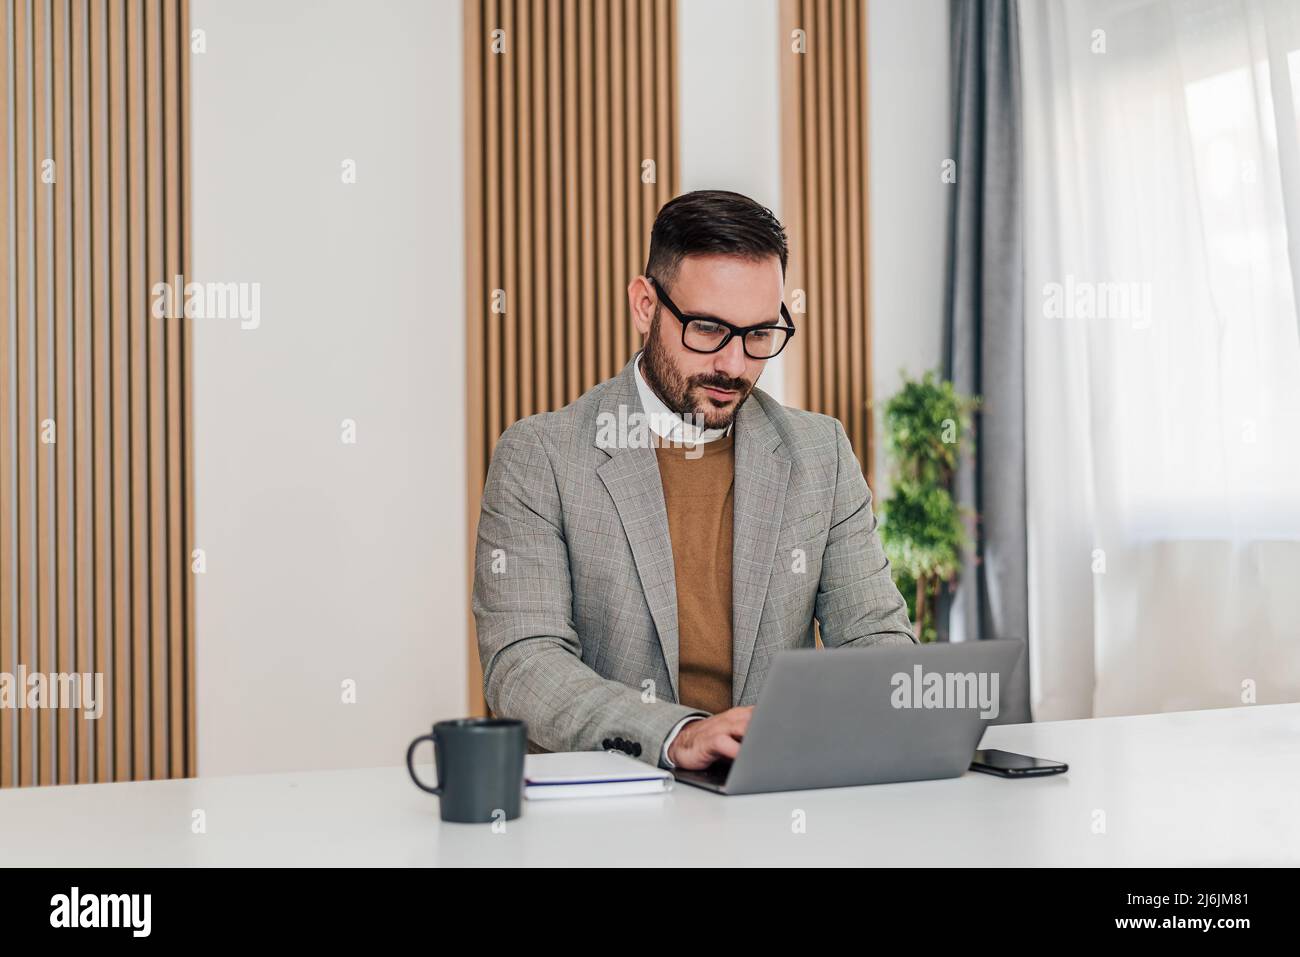 Confident businessman working on laptop. Focused male entrepreneur is wearing formals. He is sitting at desk in corporate office. Stock Photo